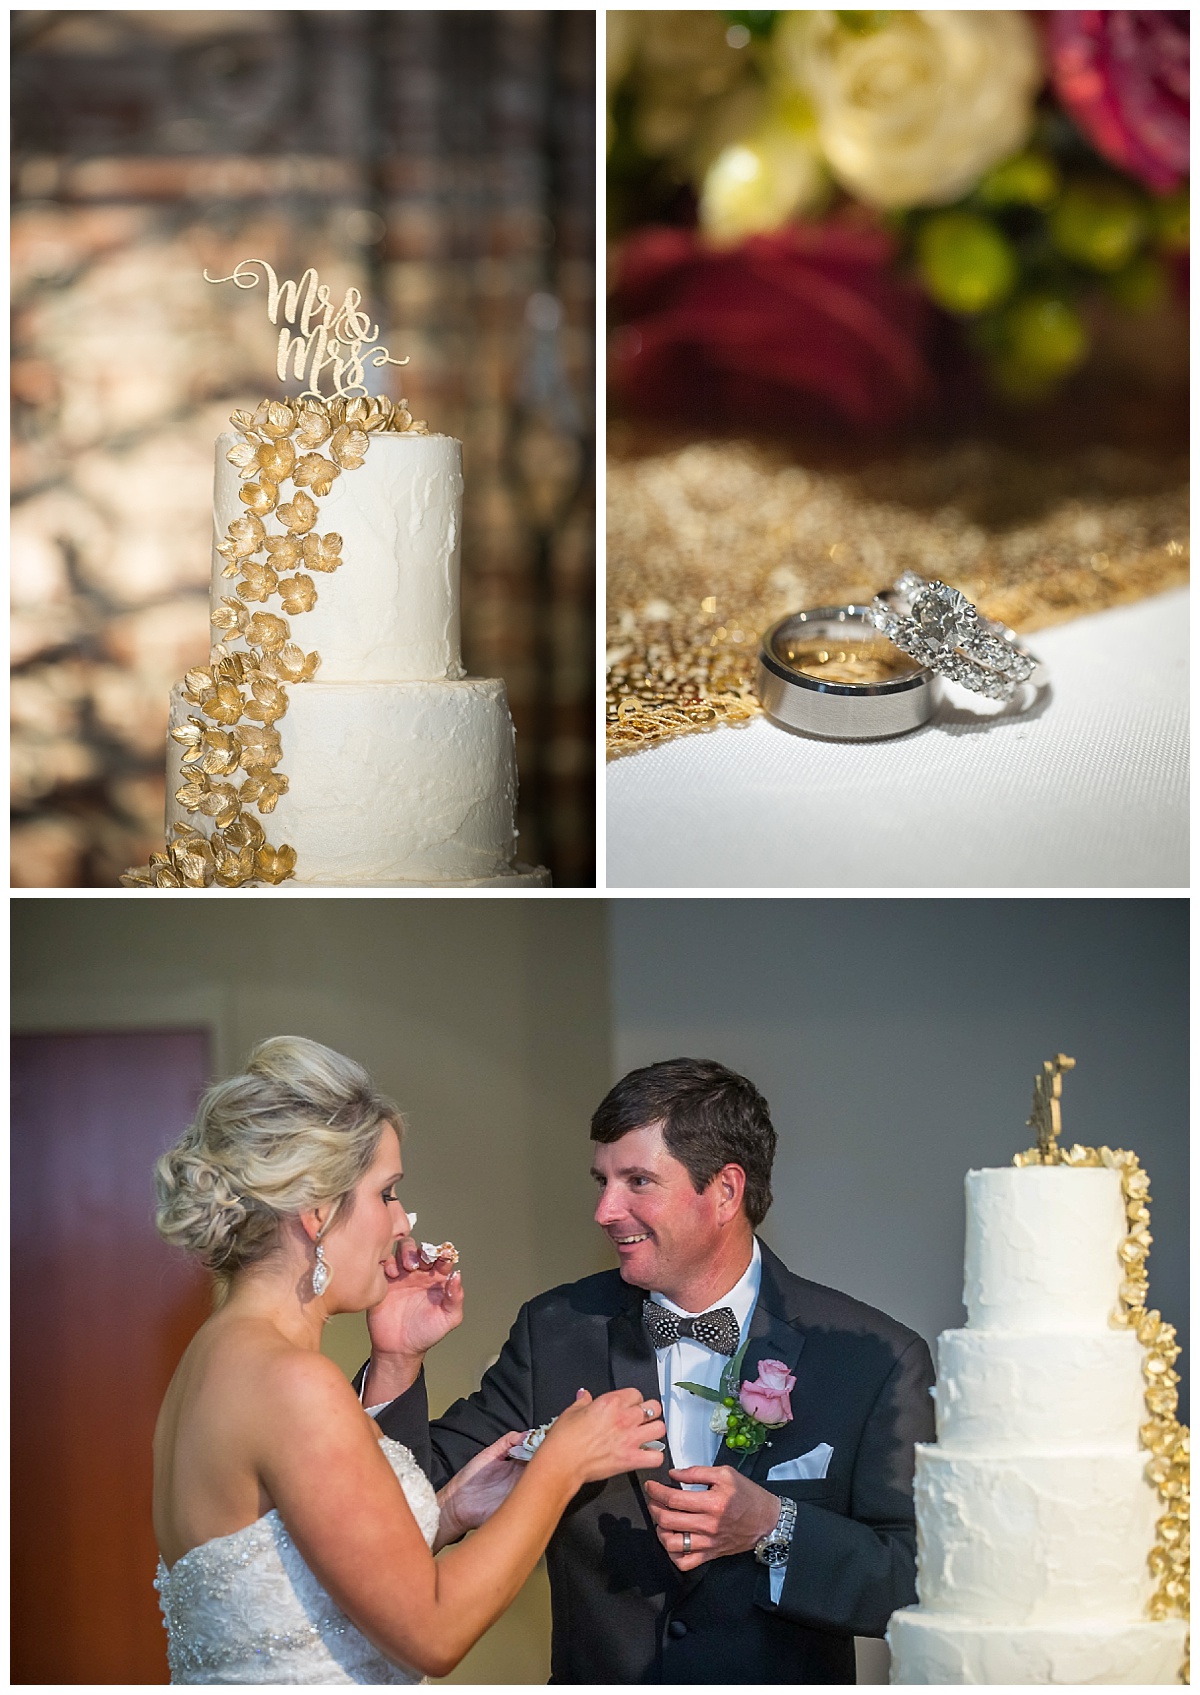 Cake cutting and wedding bands